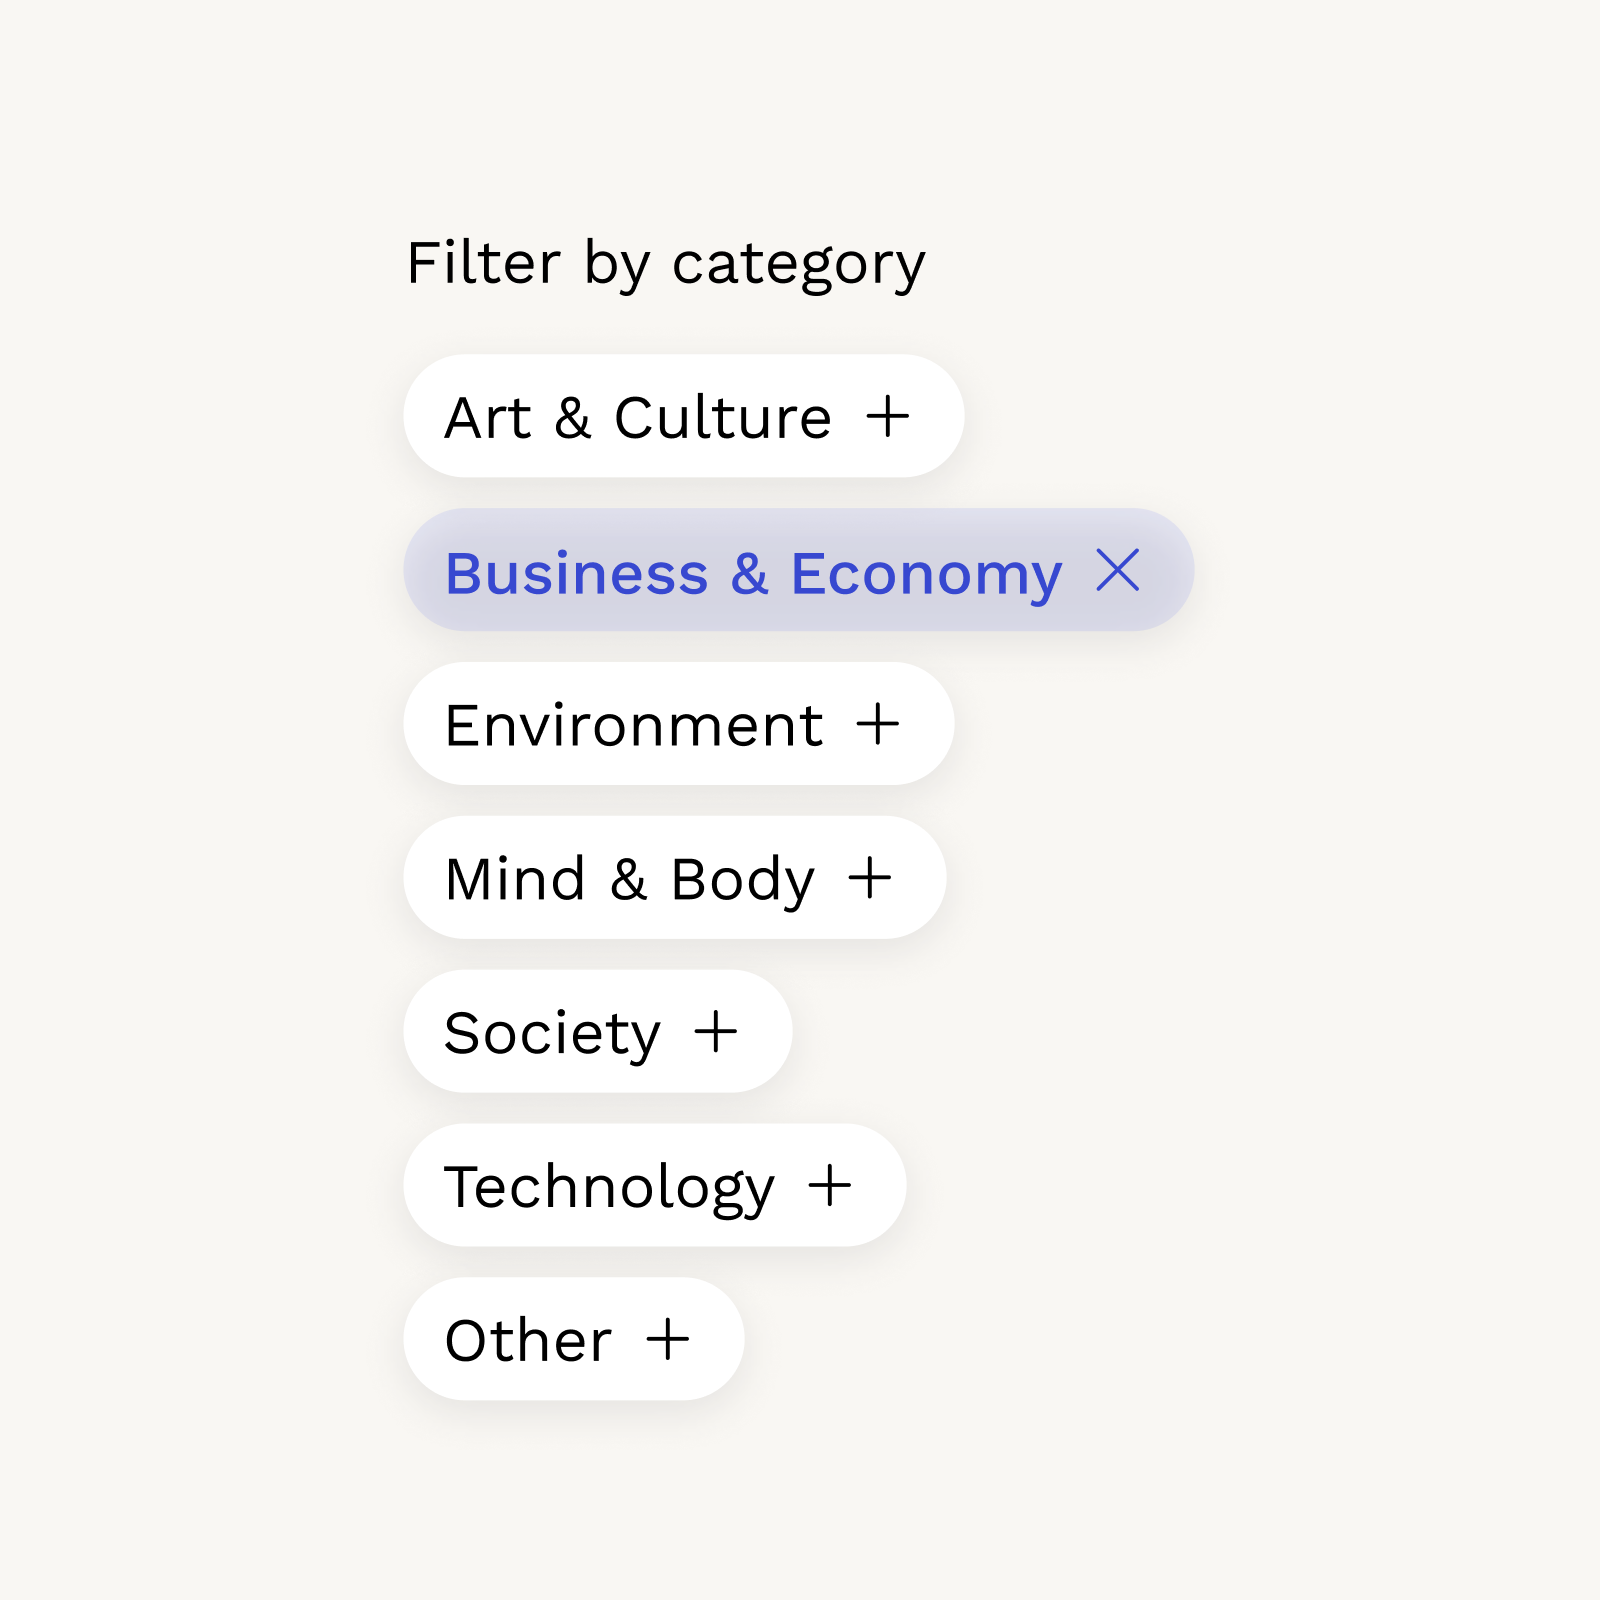 Category filters